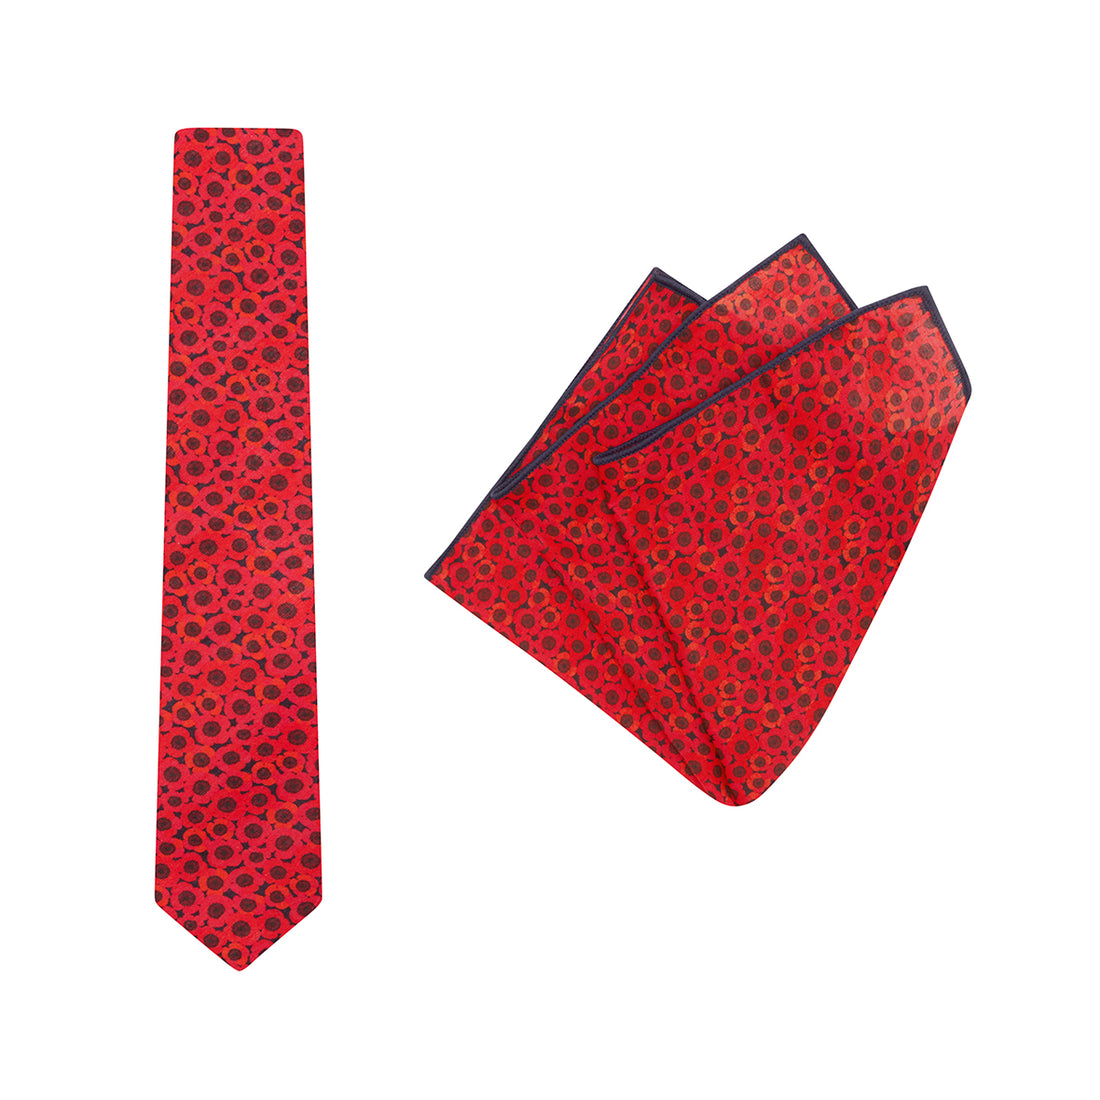 TIE + POCKET SQUARE SET. Jocelyn Proust Poppy Print. Red/Navy. Supplied with matching red/navy pocket square.-Ties-PEROZ Accessories